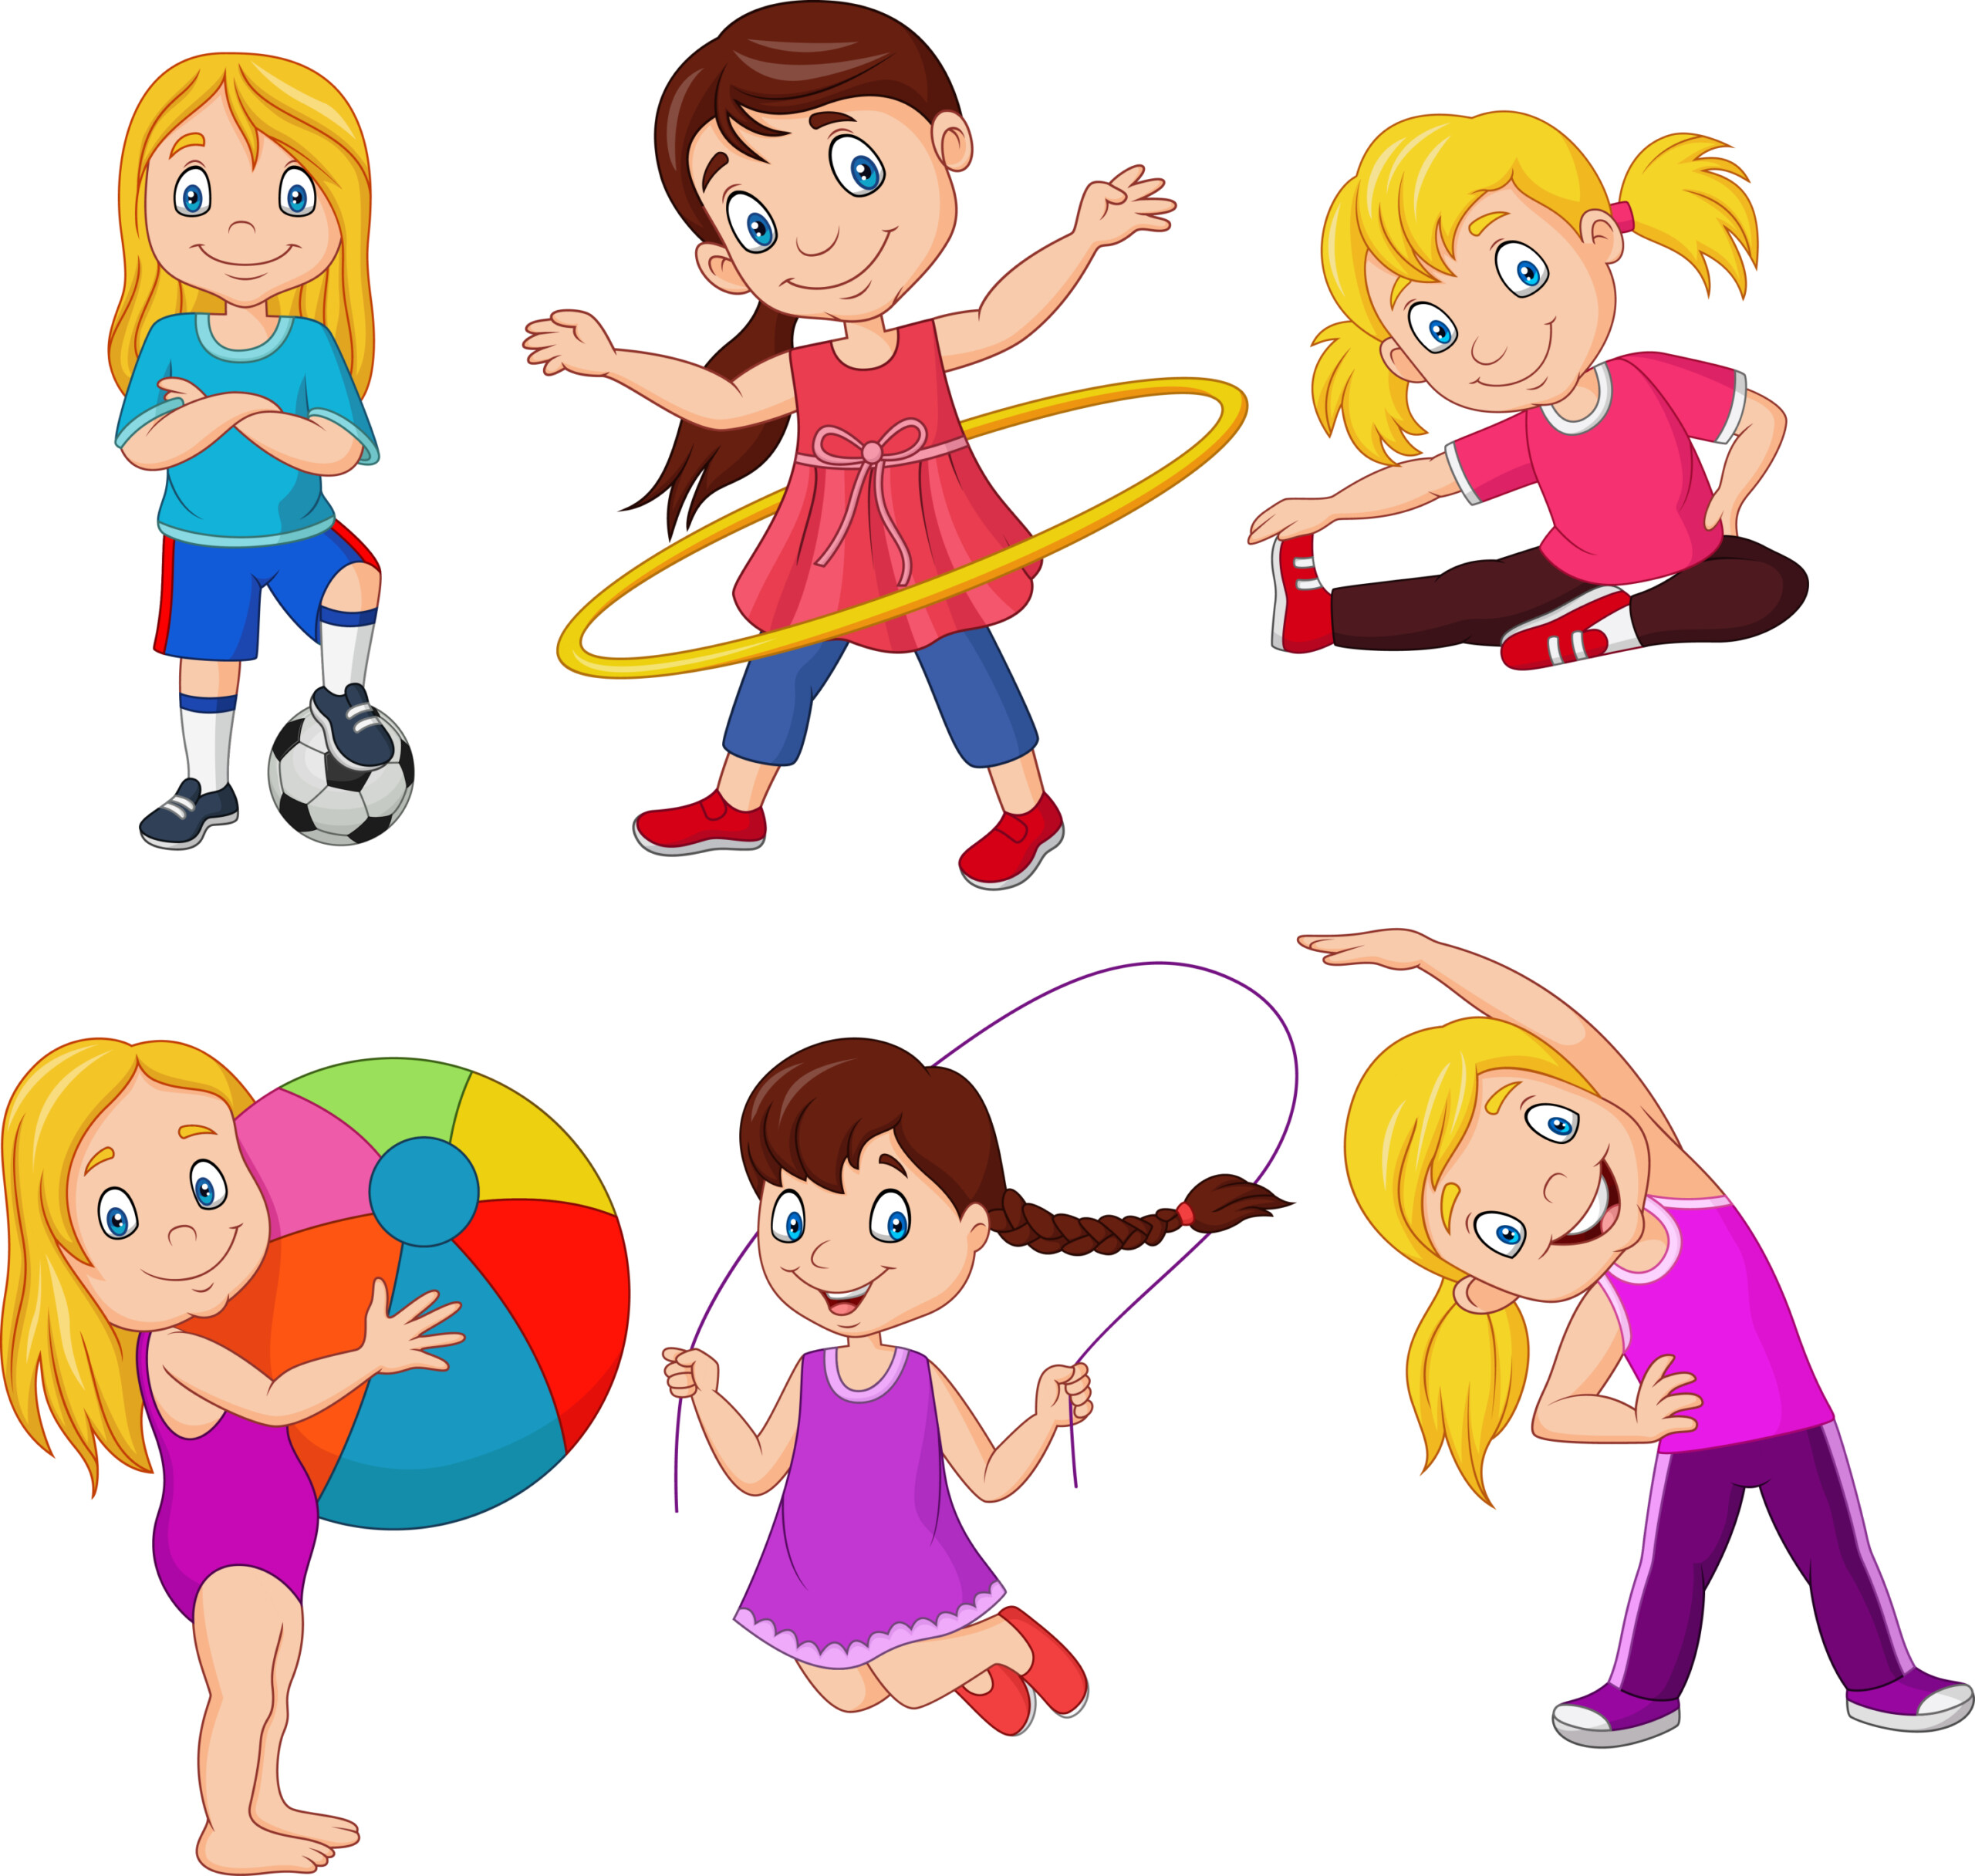 Little Girls With Different Hobbies - Original image